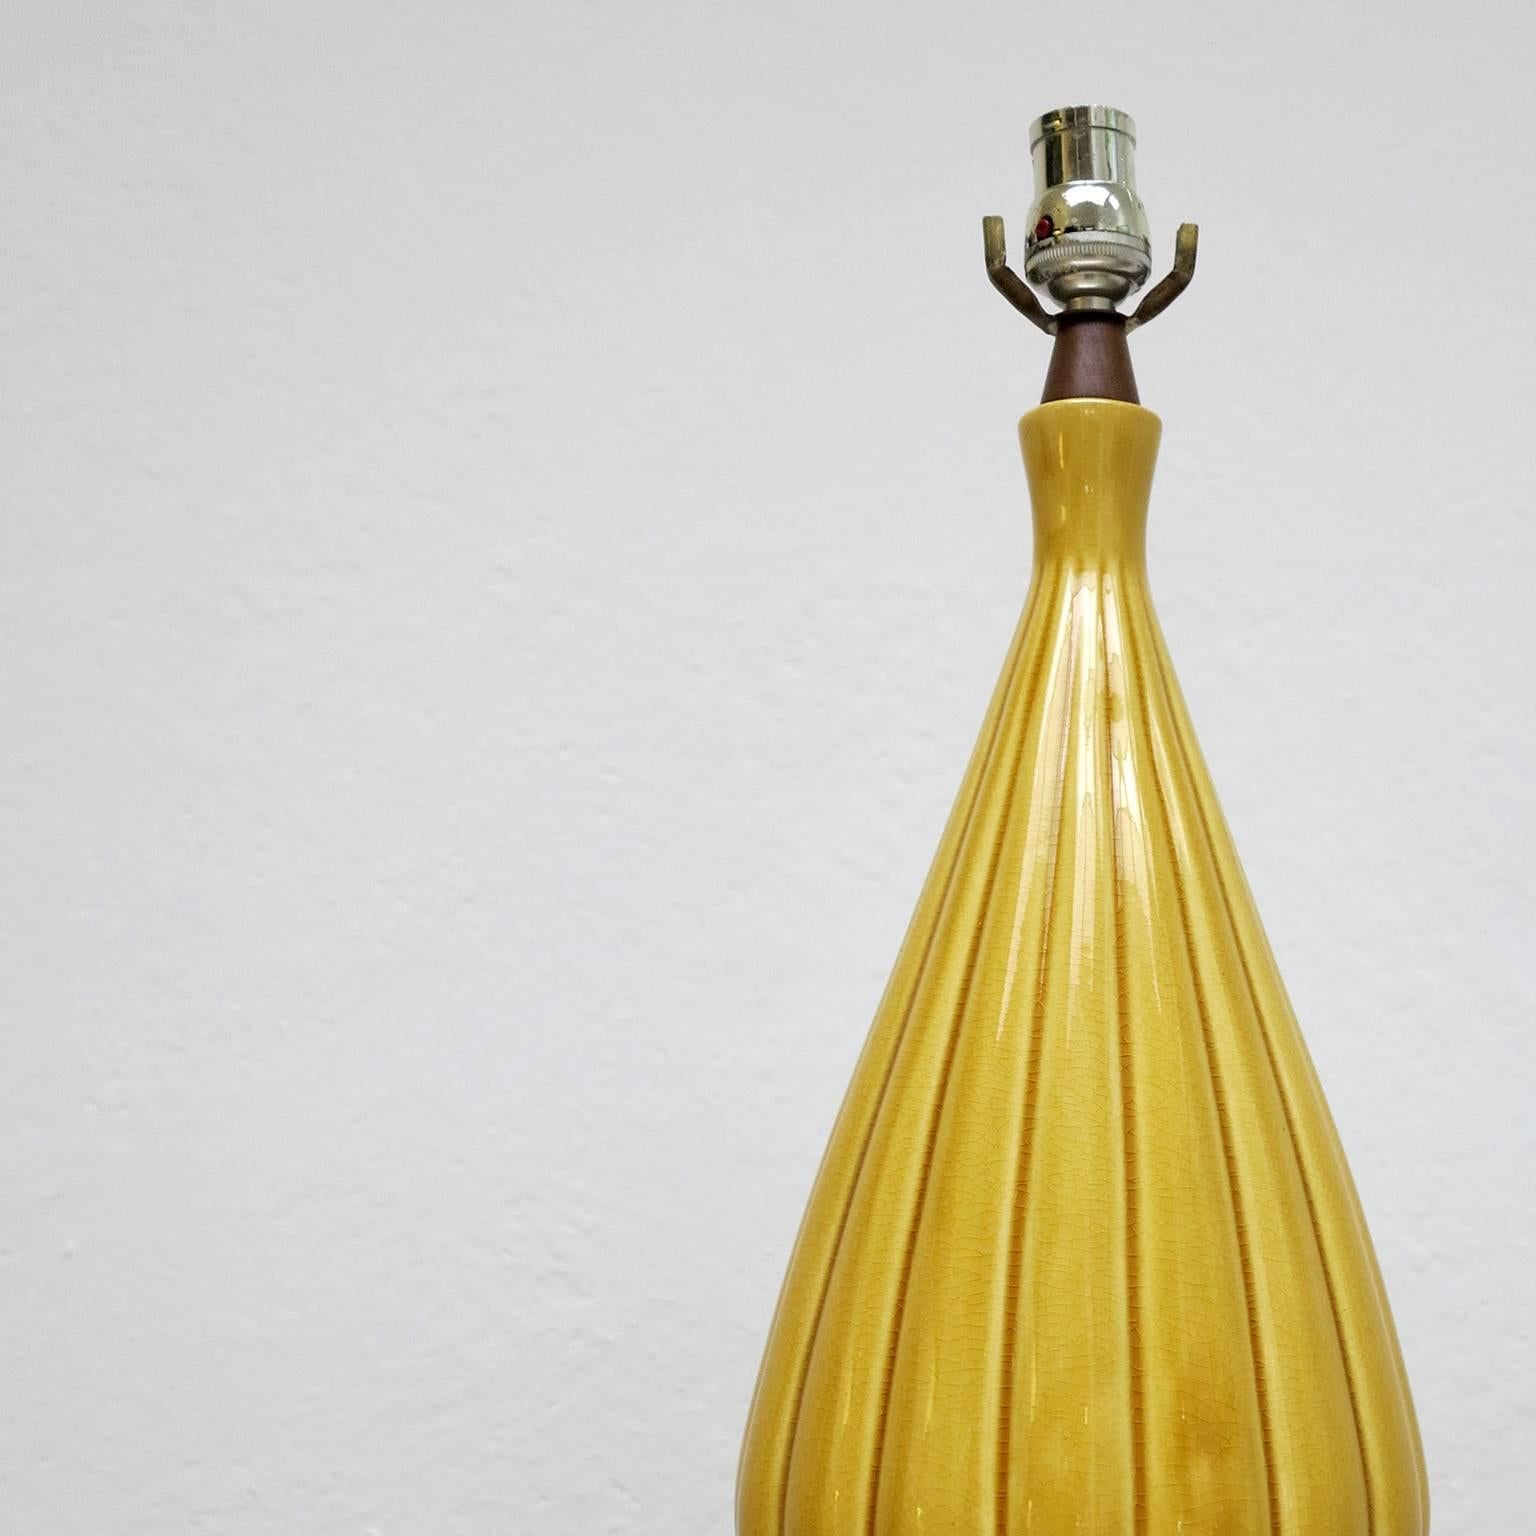 Mid-Century Modern Table Lamp Manufactured in Yellow Colored Porcelain, circa 1960 For Sale